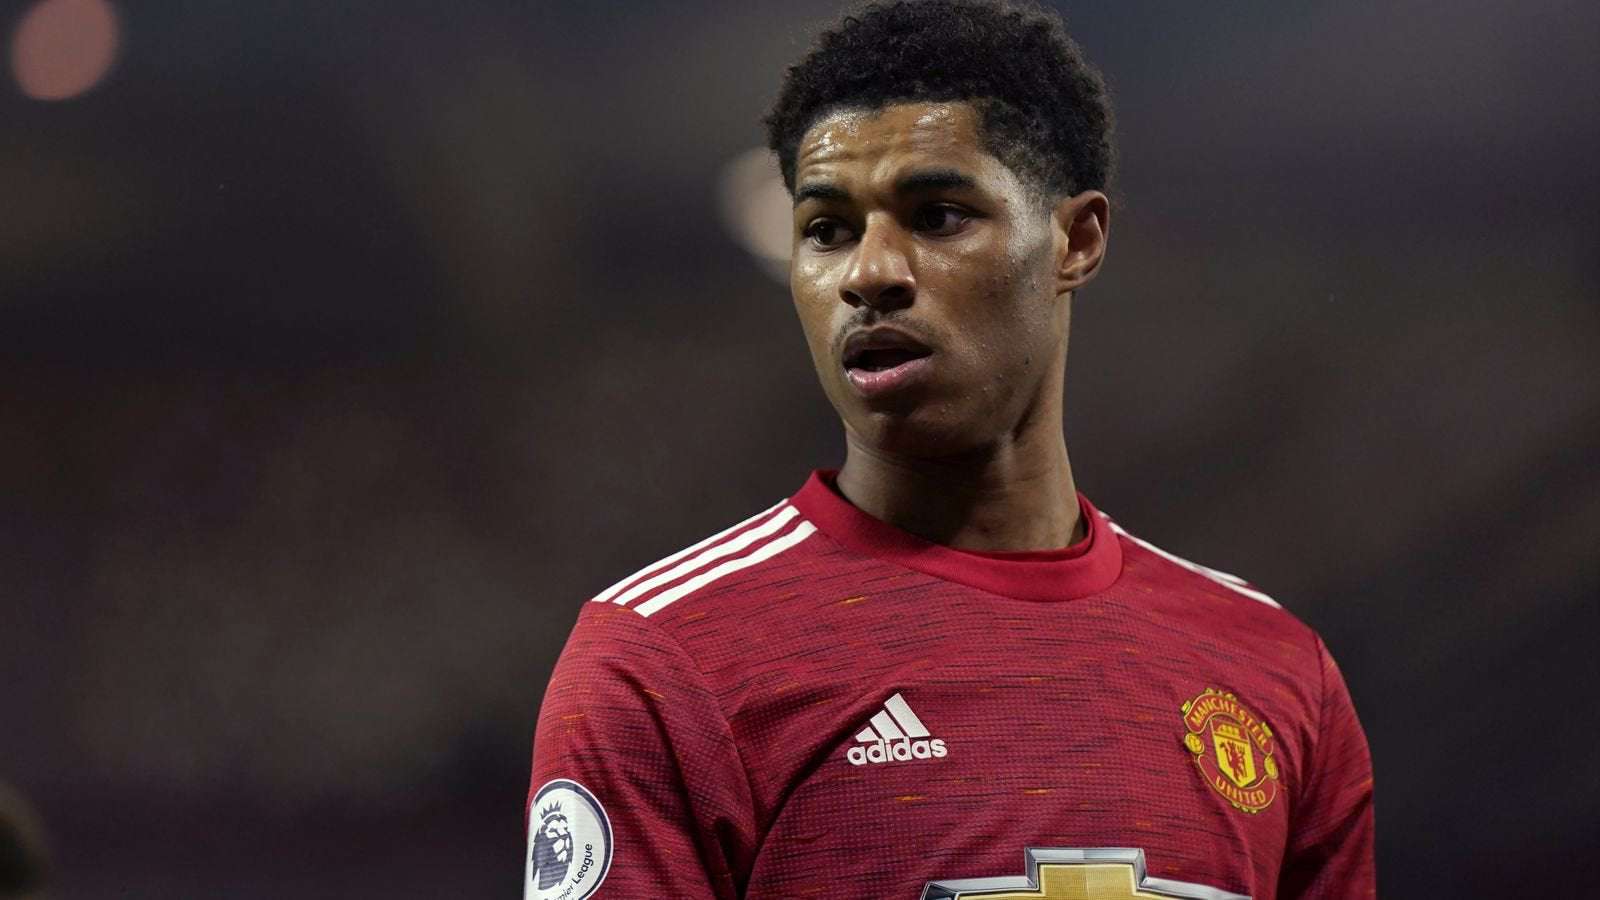 image for Marcus Rashford: Man Utd forward becomes youngest person to top Sunday Times Giving List